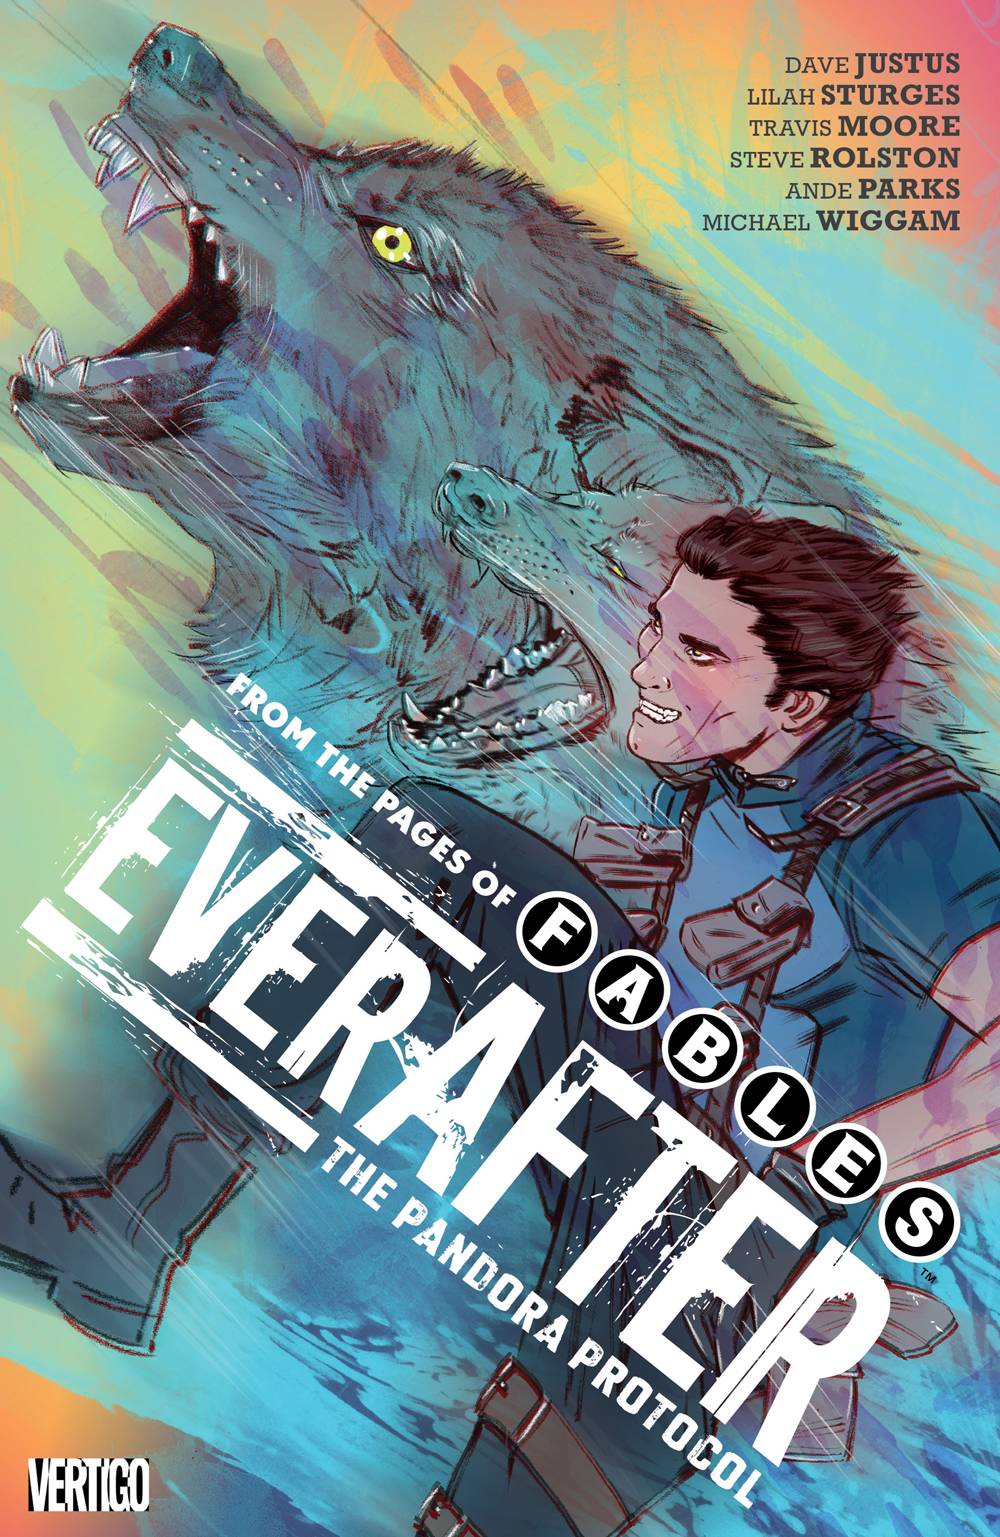 Everafter: From the Pages of Fables TPB Bk 1  NM